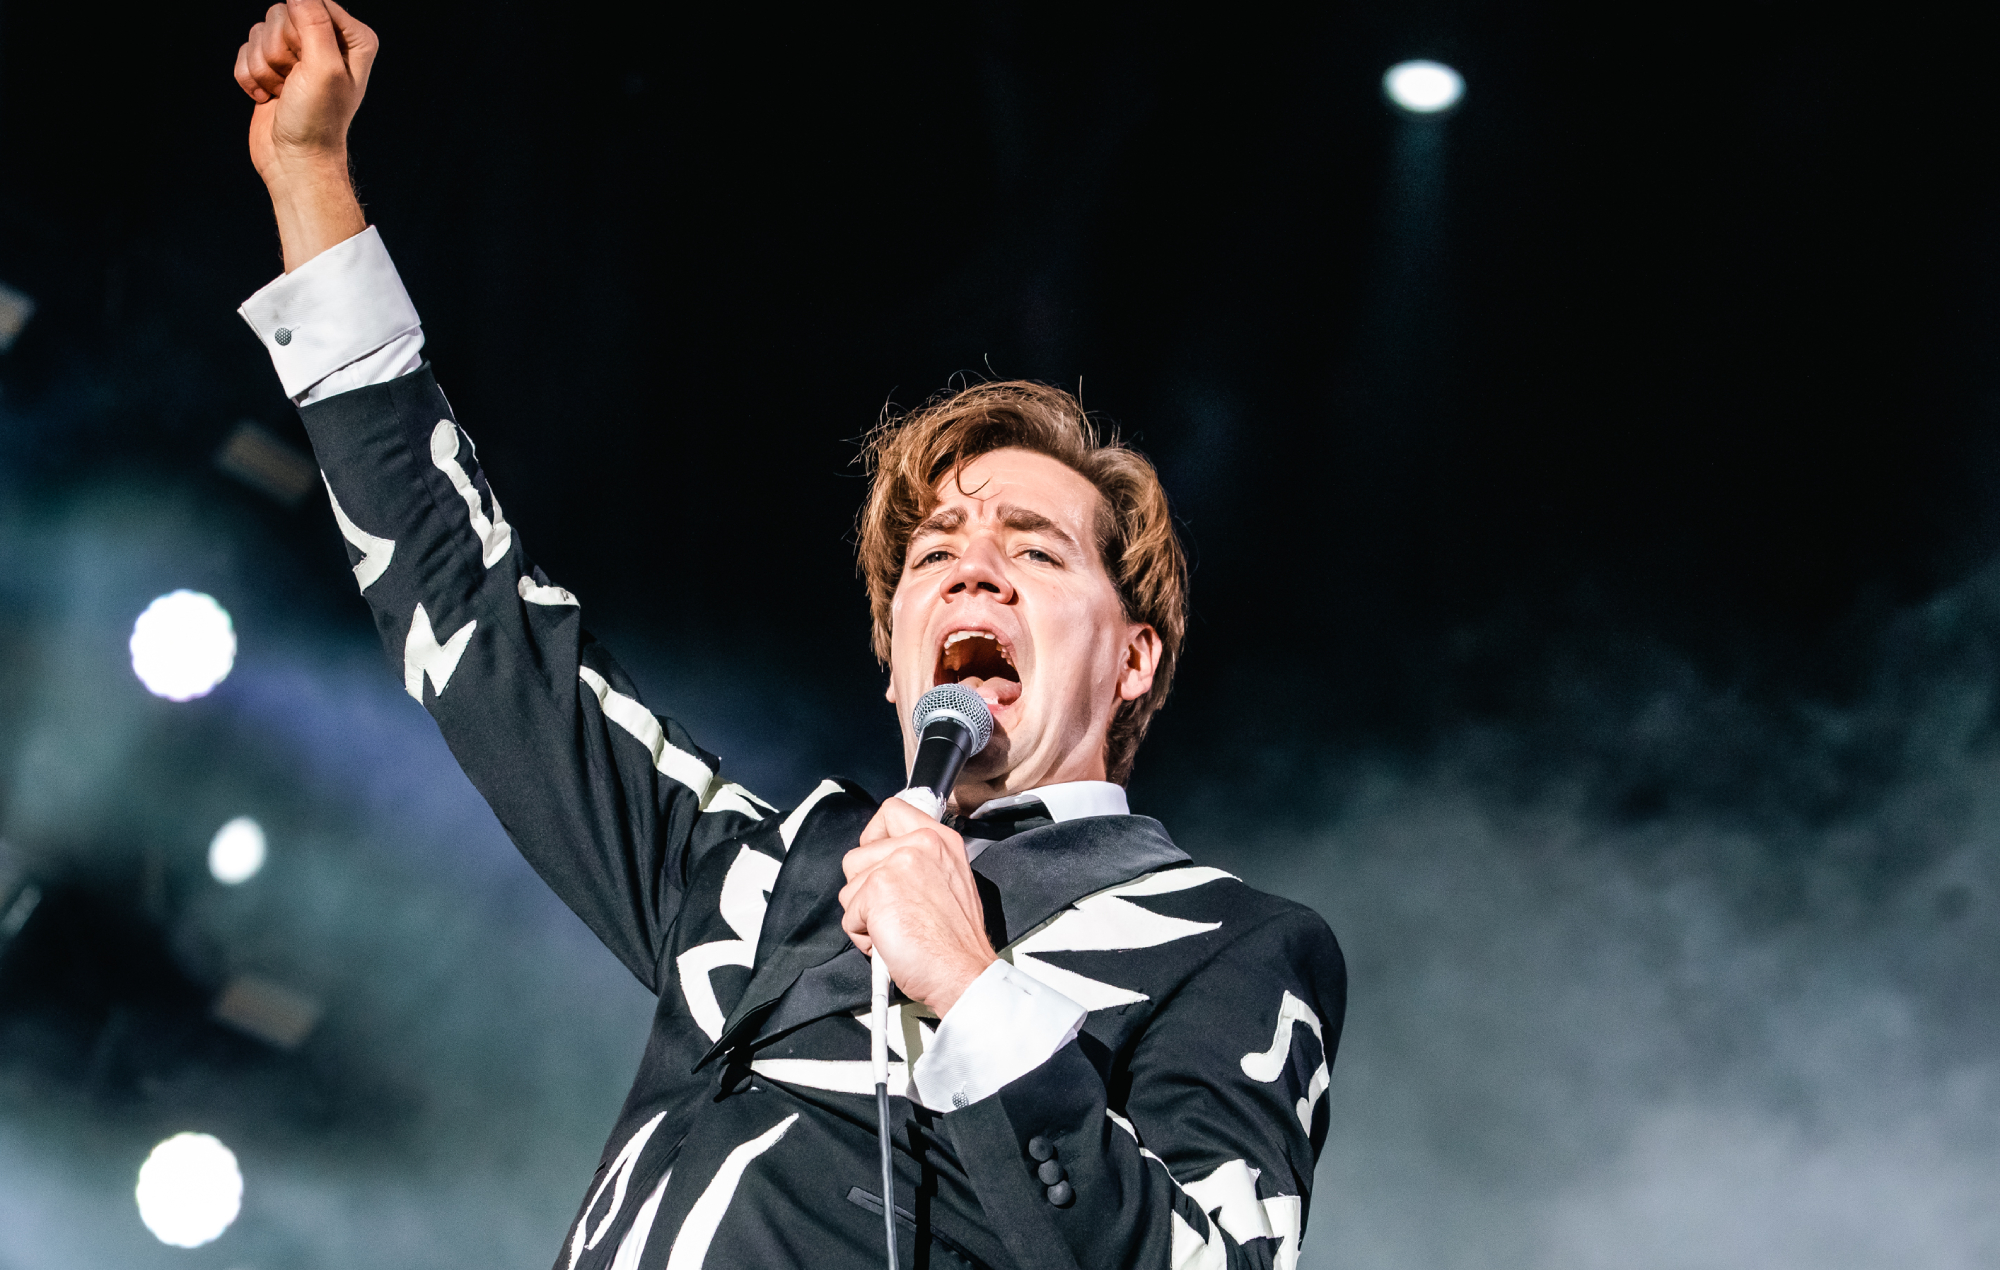 The Hives are looking for covers bands to “franchise” live shows